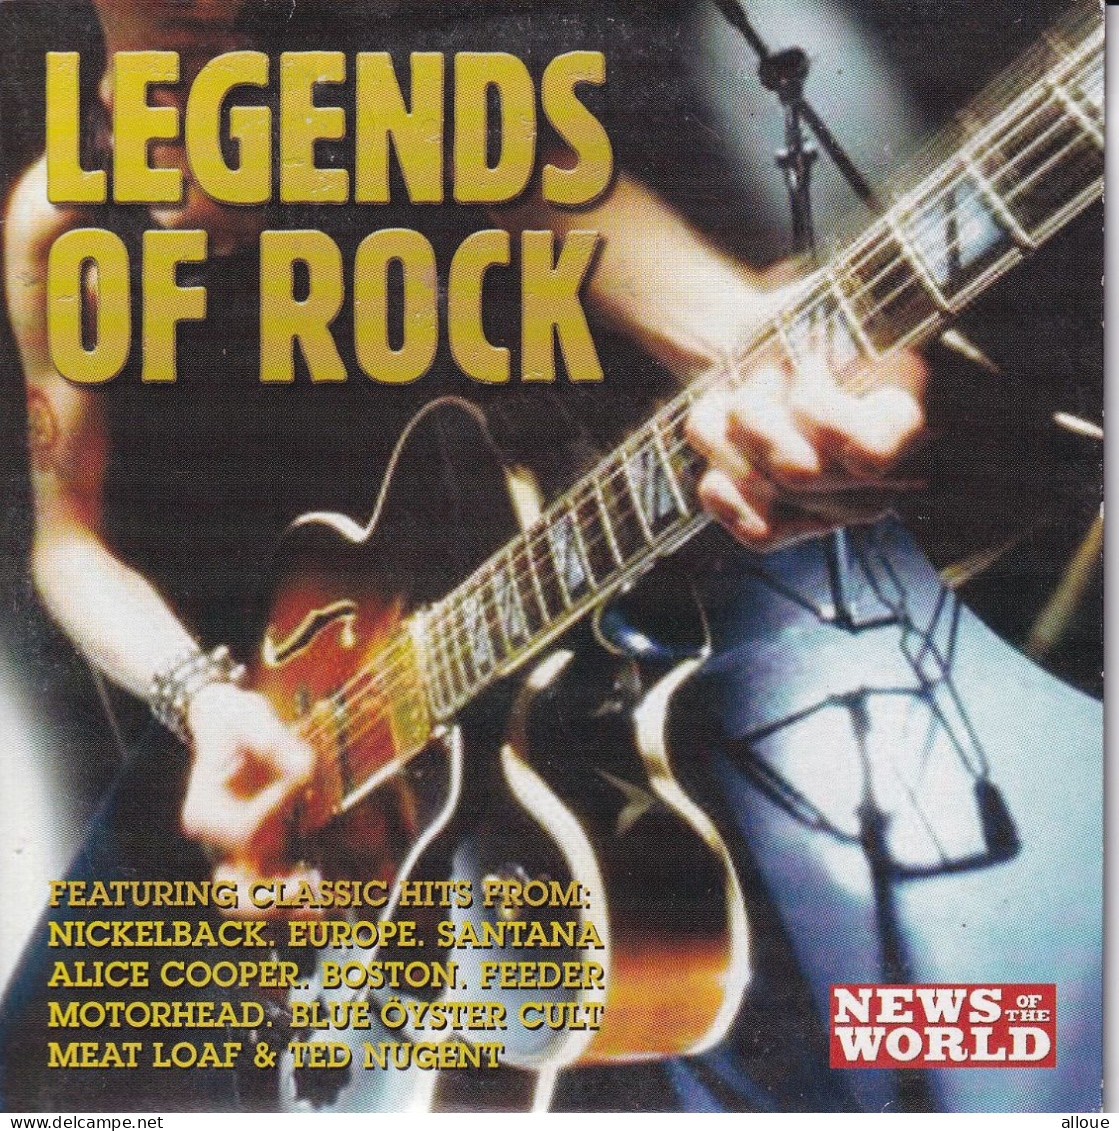 LEGENDS OF ROCK - CD NEWS OF THE WORLD -POCHETTE CARTON 10TRACK - MEAT LOAF-ALICE COOPER-EUROPE-MOTORHEAD - Other - English Music